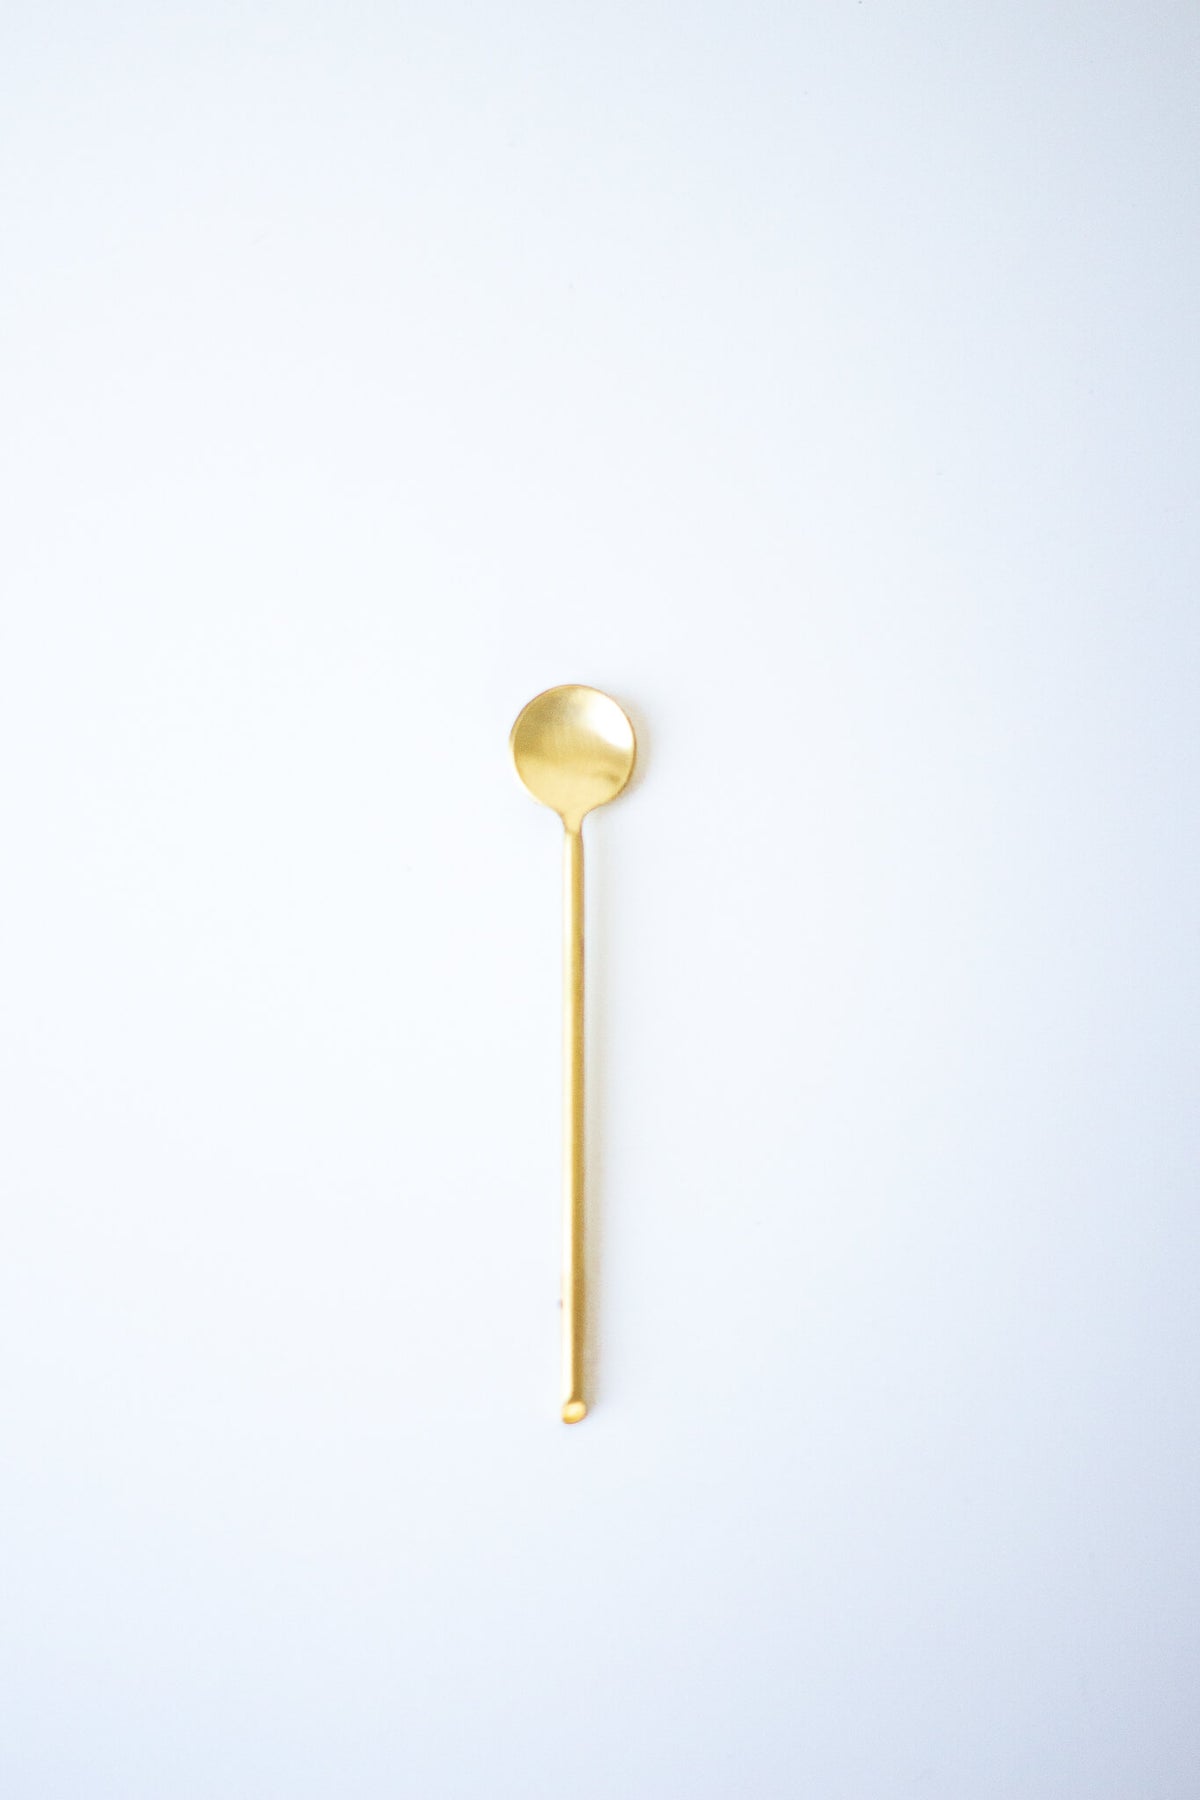 Be Home Gold Thin Spoon